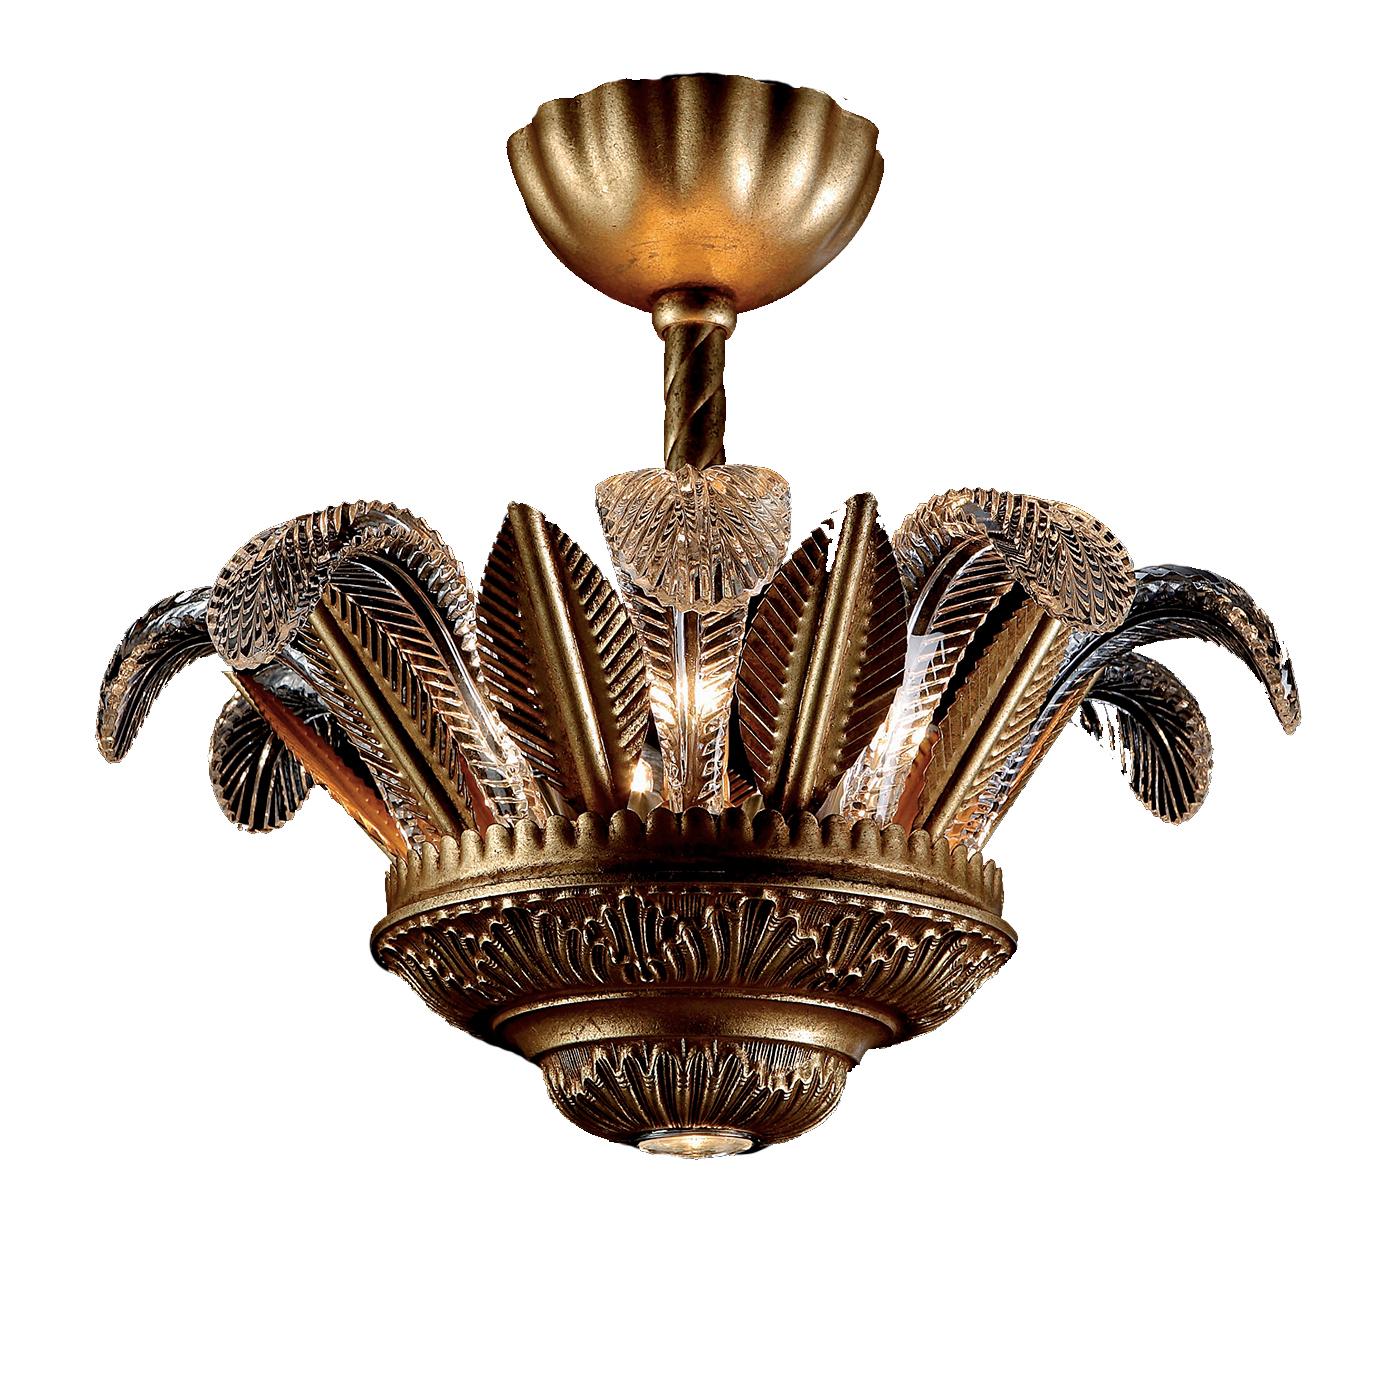 Italian Iron and Brass Ceiling Lamp by Banci